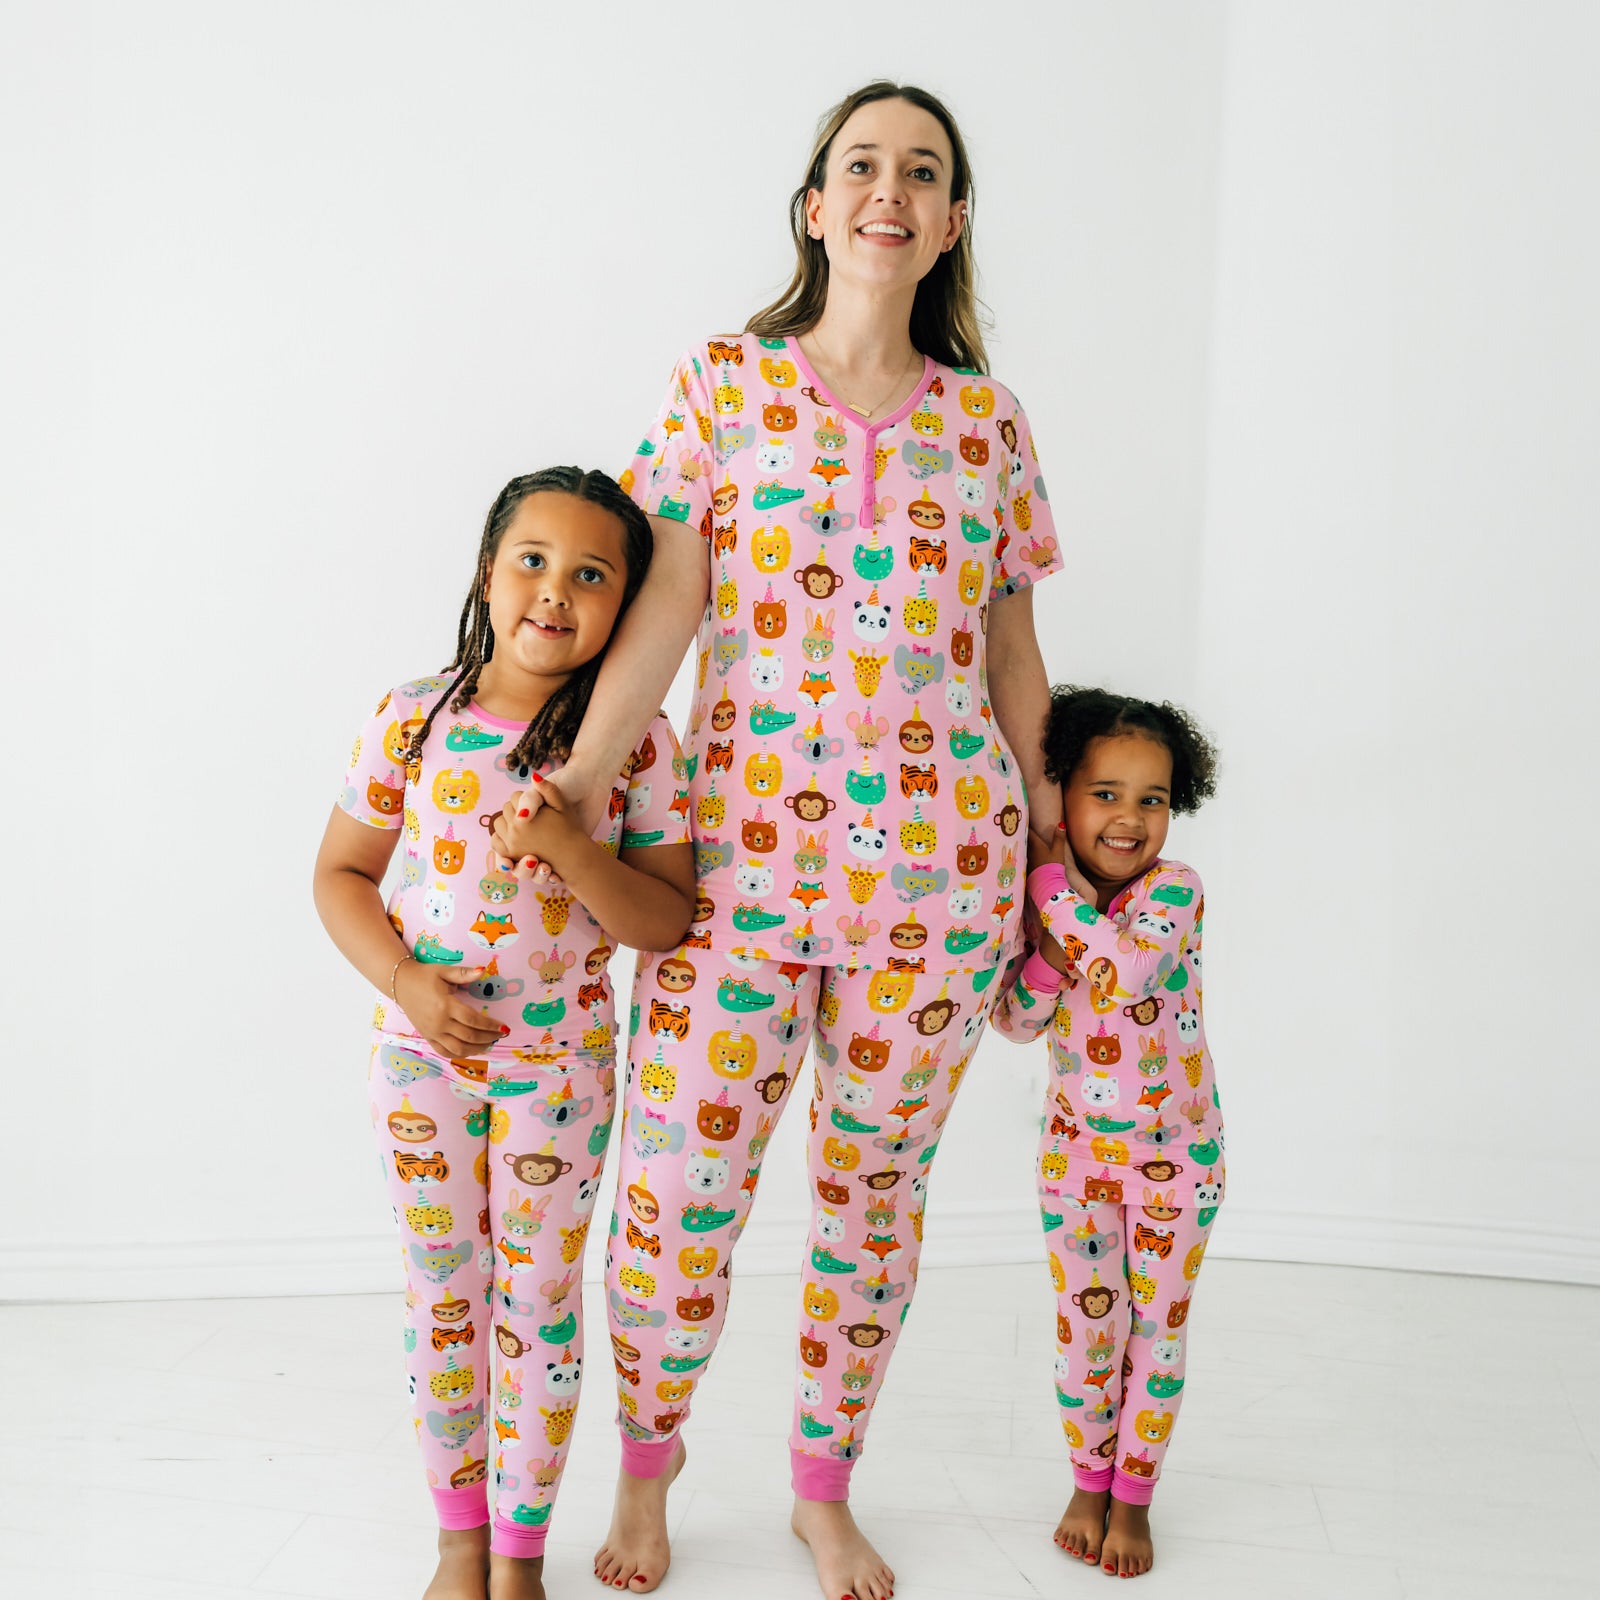 Mother and her two children wearing matching Pink Party Pals pjs. Mom is wearing women's Pink Party Pals women's pj top and matching women's pj pants. Children are wearing matching pj sets